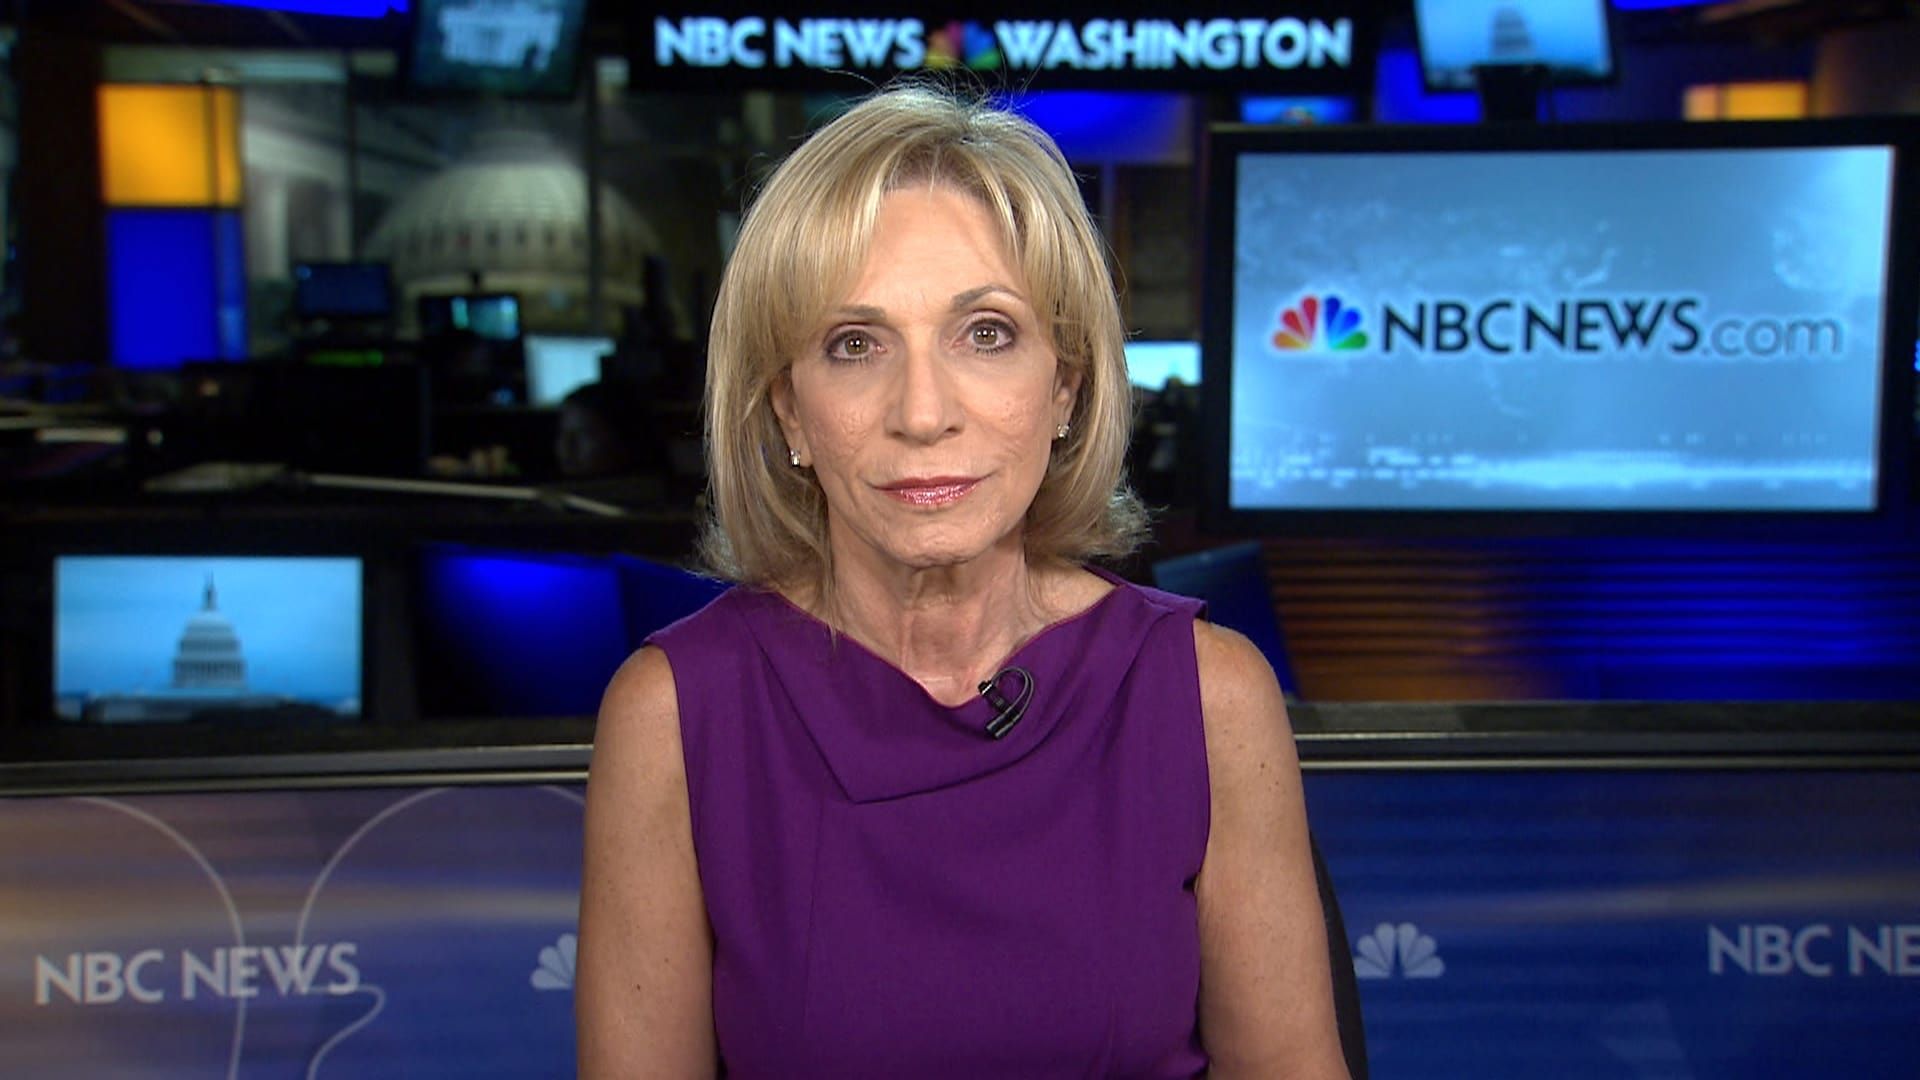 Andrea Mitchell Reports background